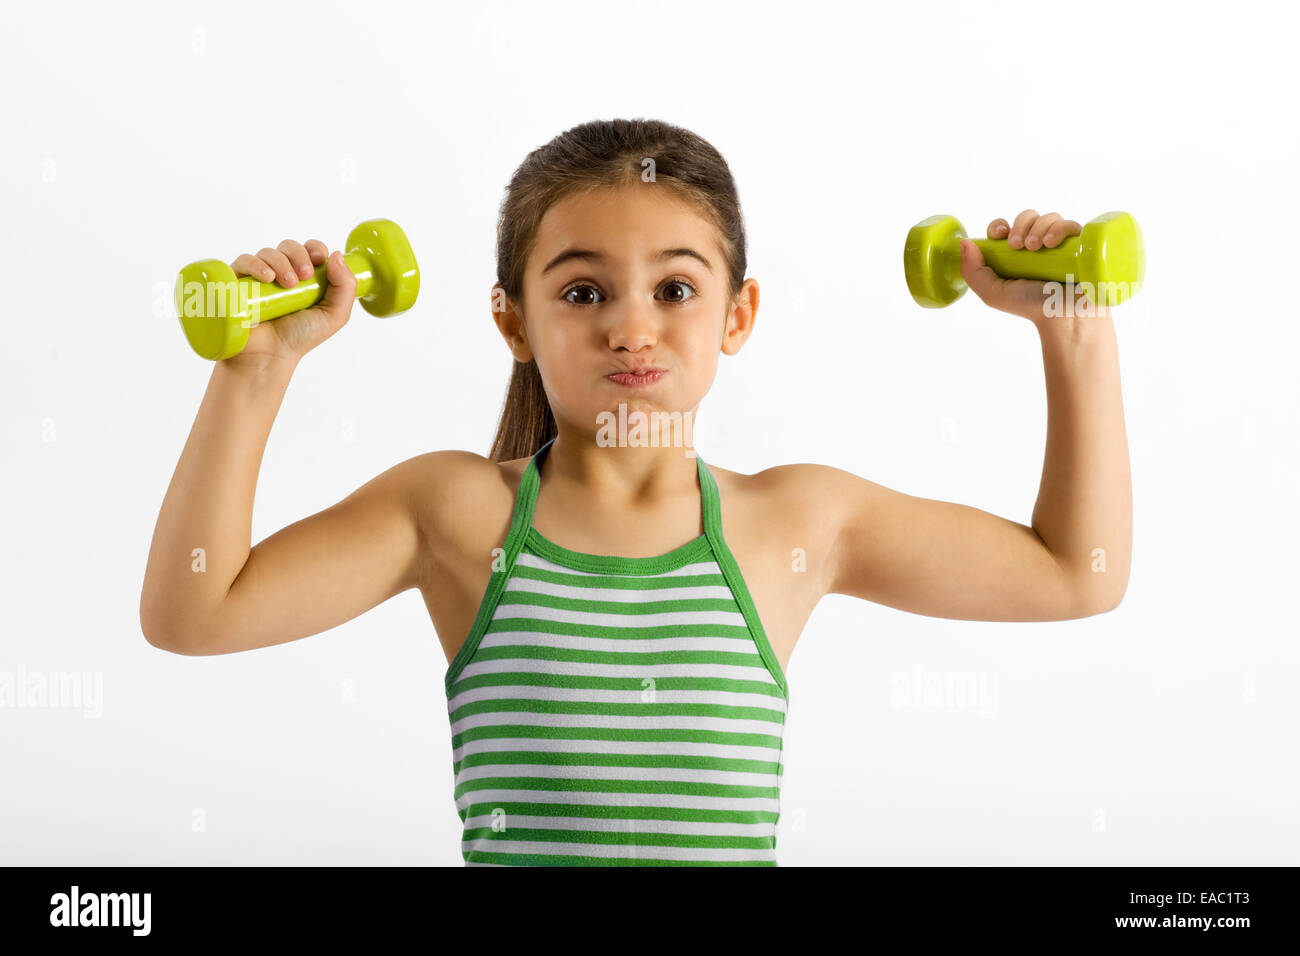 Cute little girl working out Stock Photo